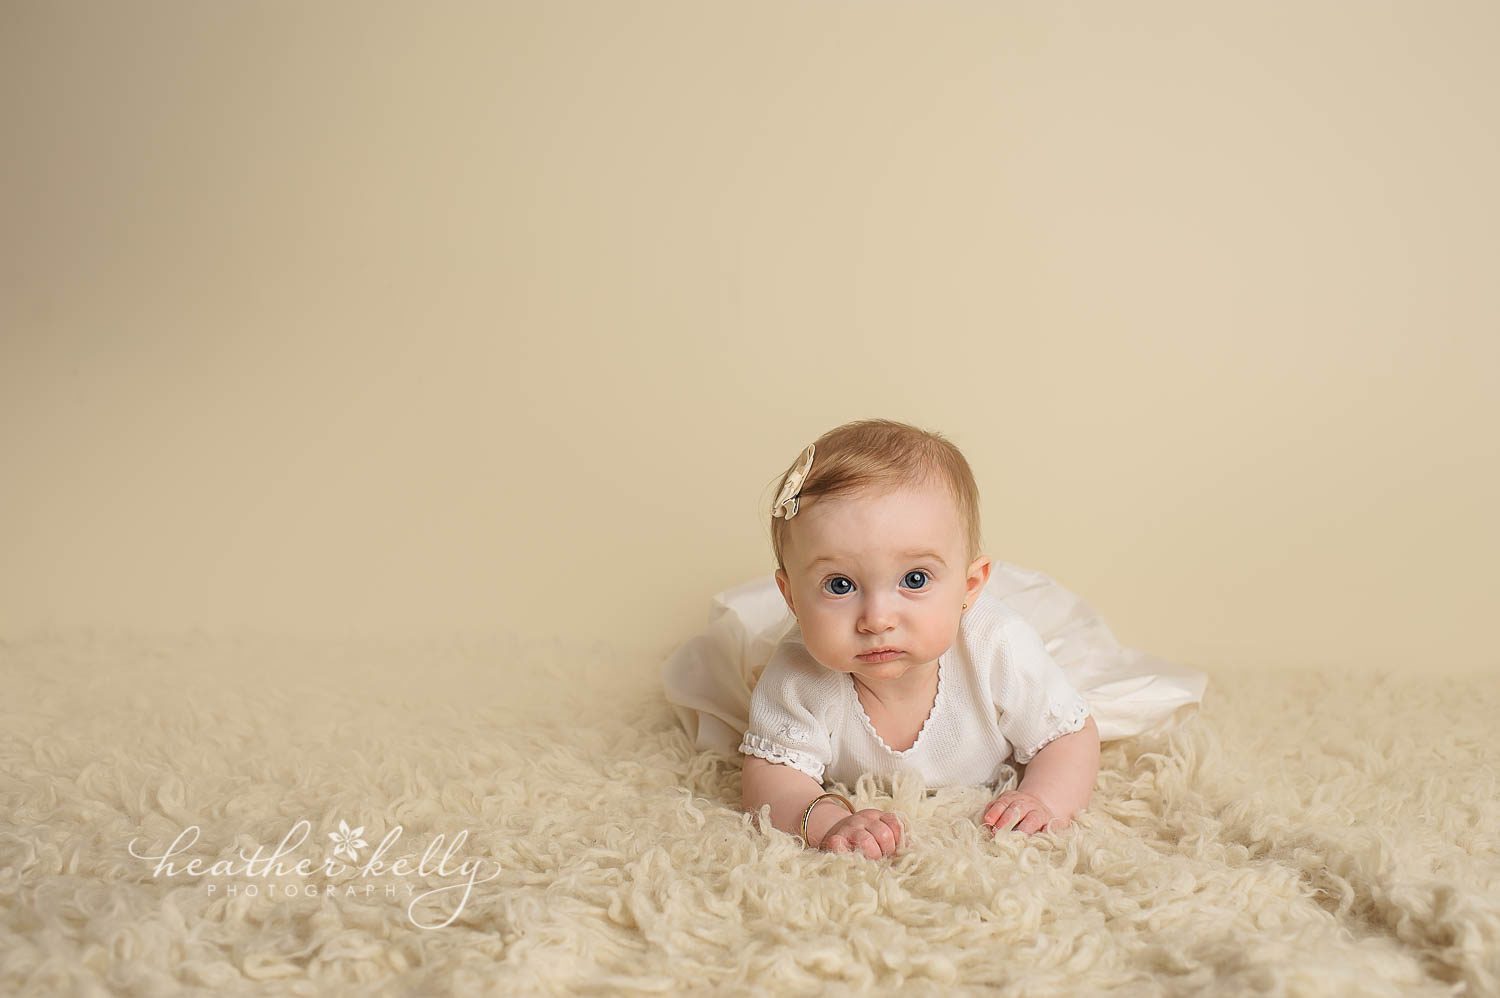 7 month girl laying on rug during baptism portrait photography. Bethel ct baby photographer heather kelly photography